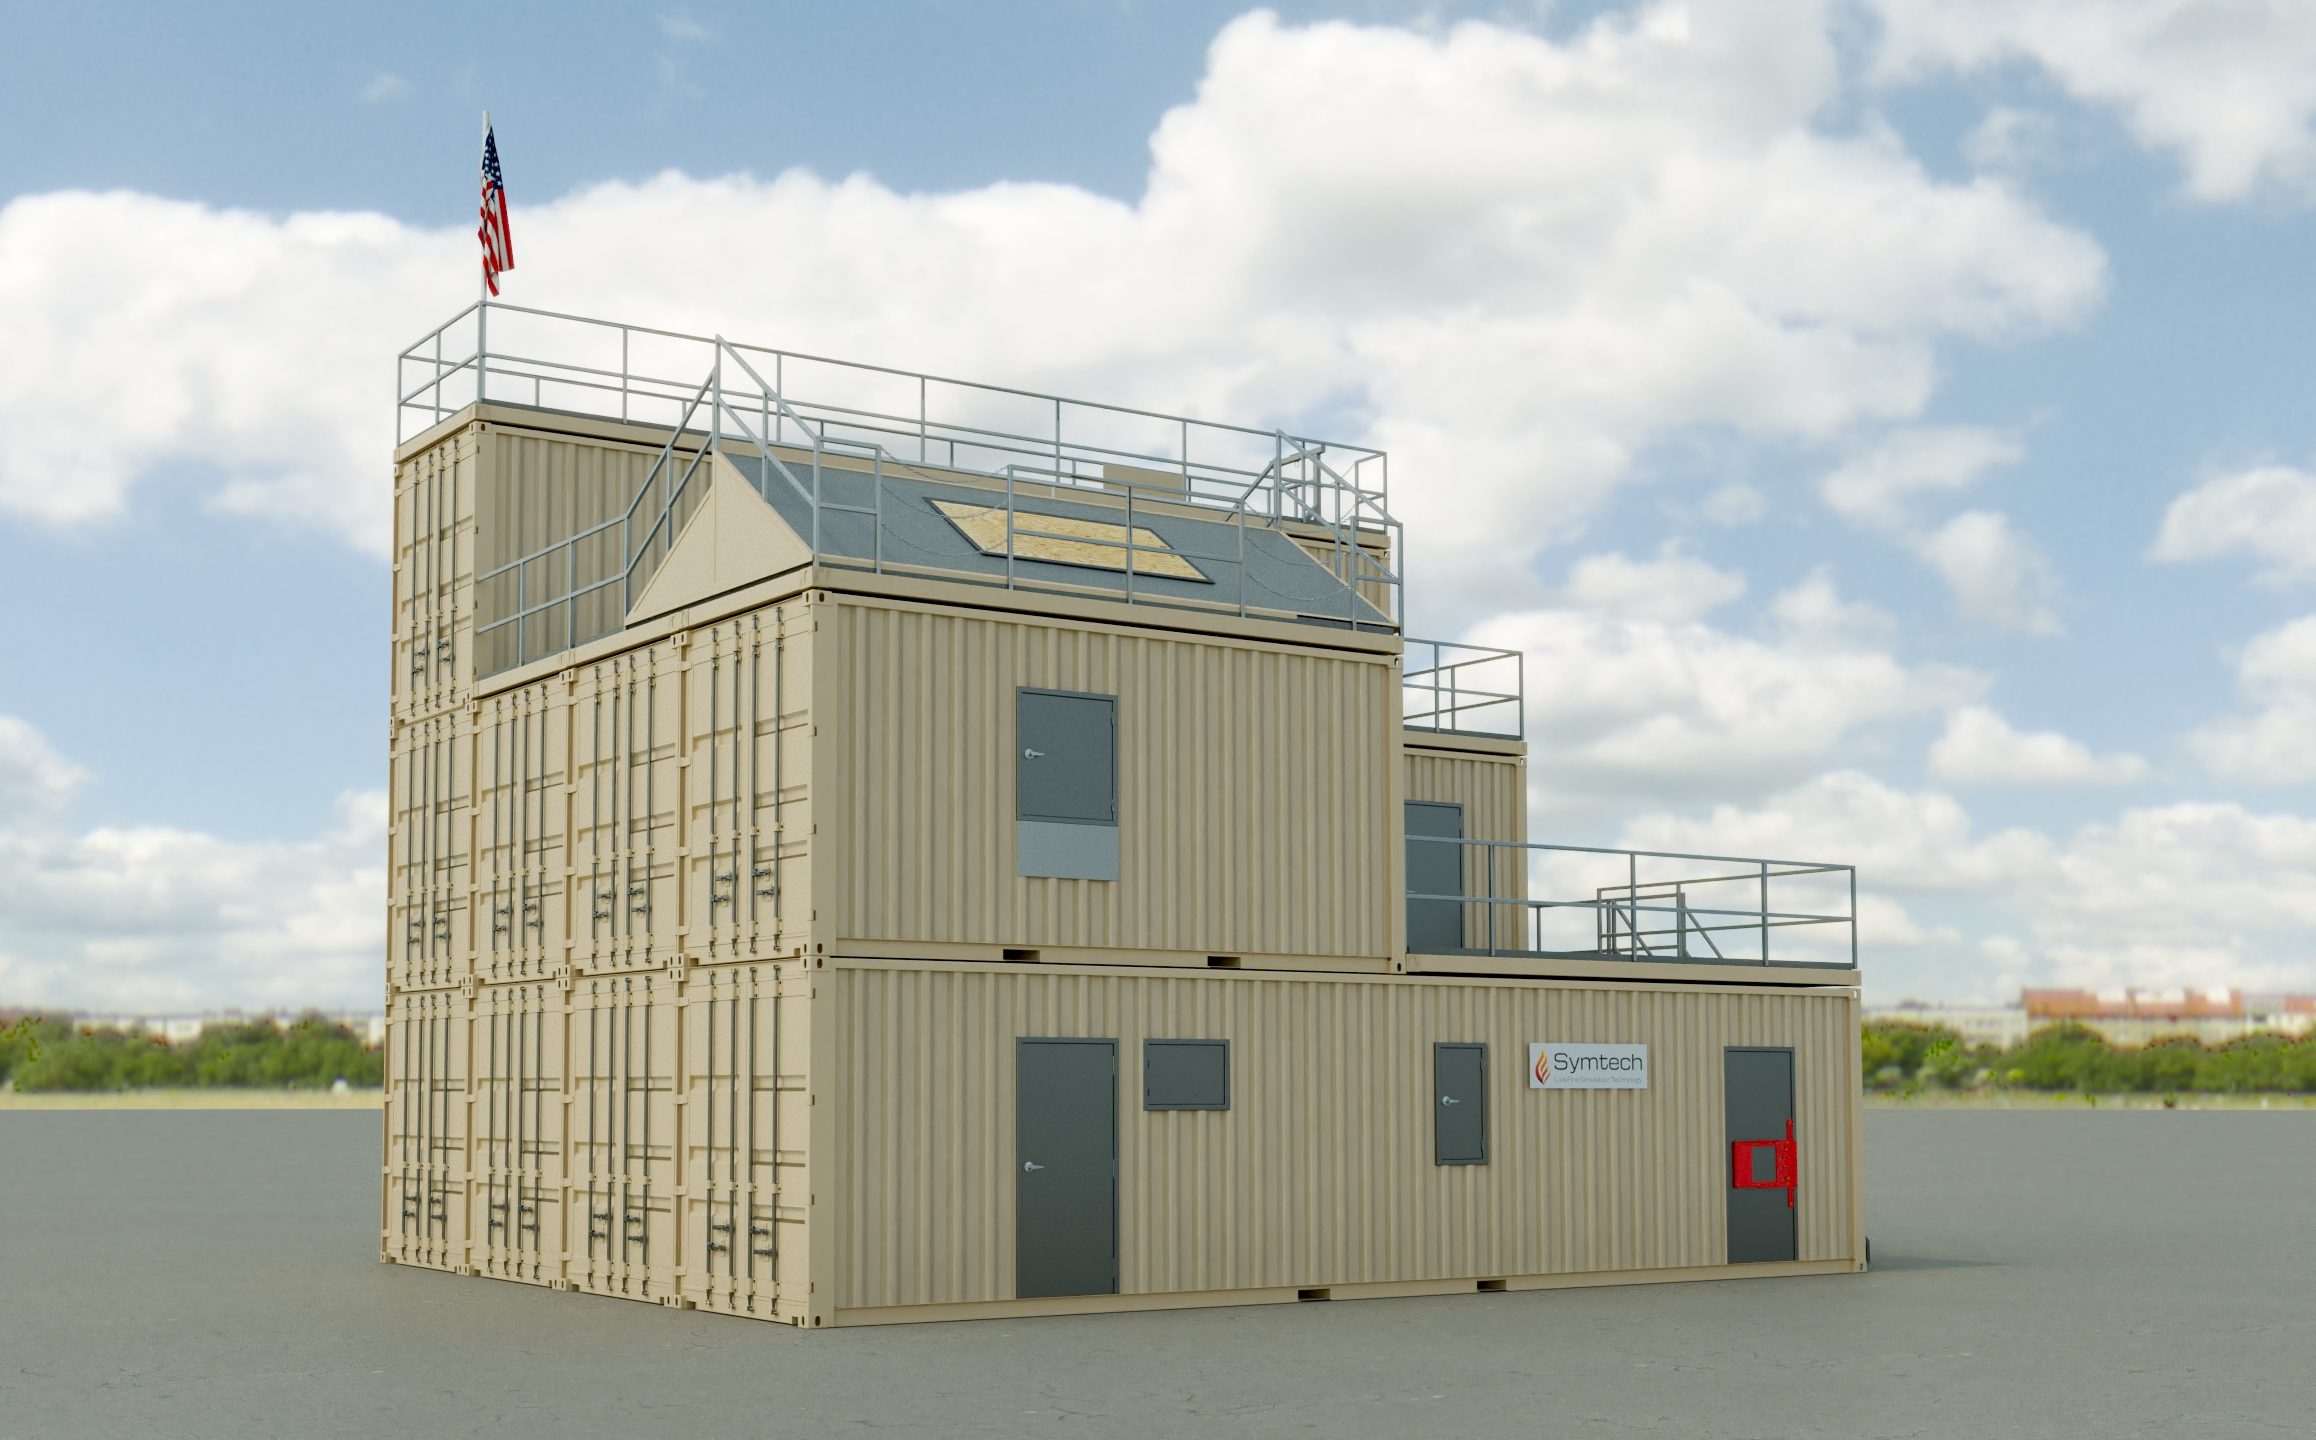 Container Fire Training Tower